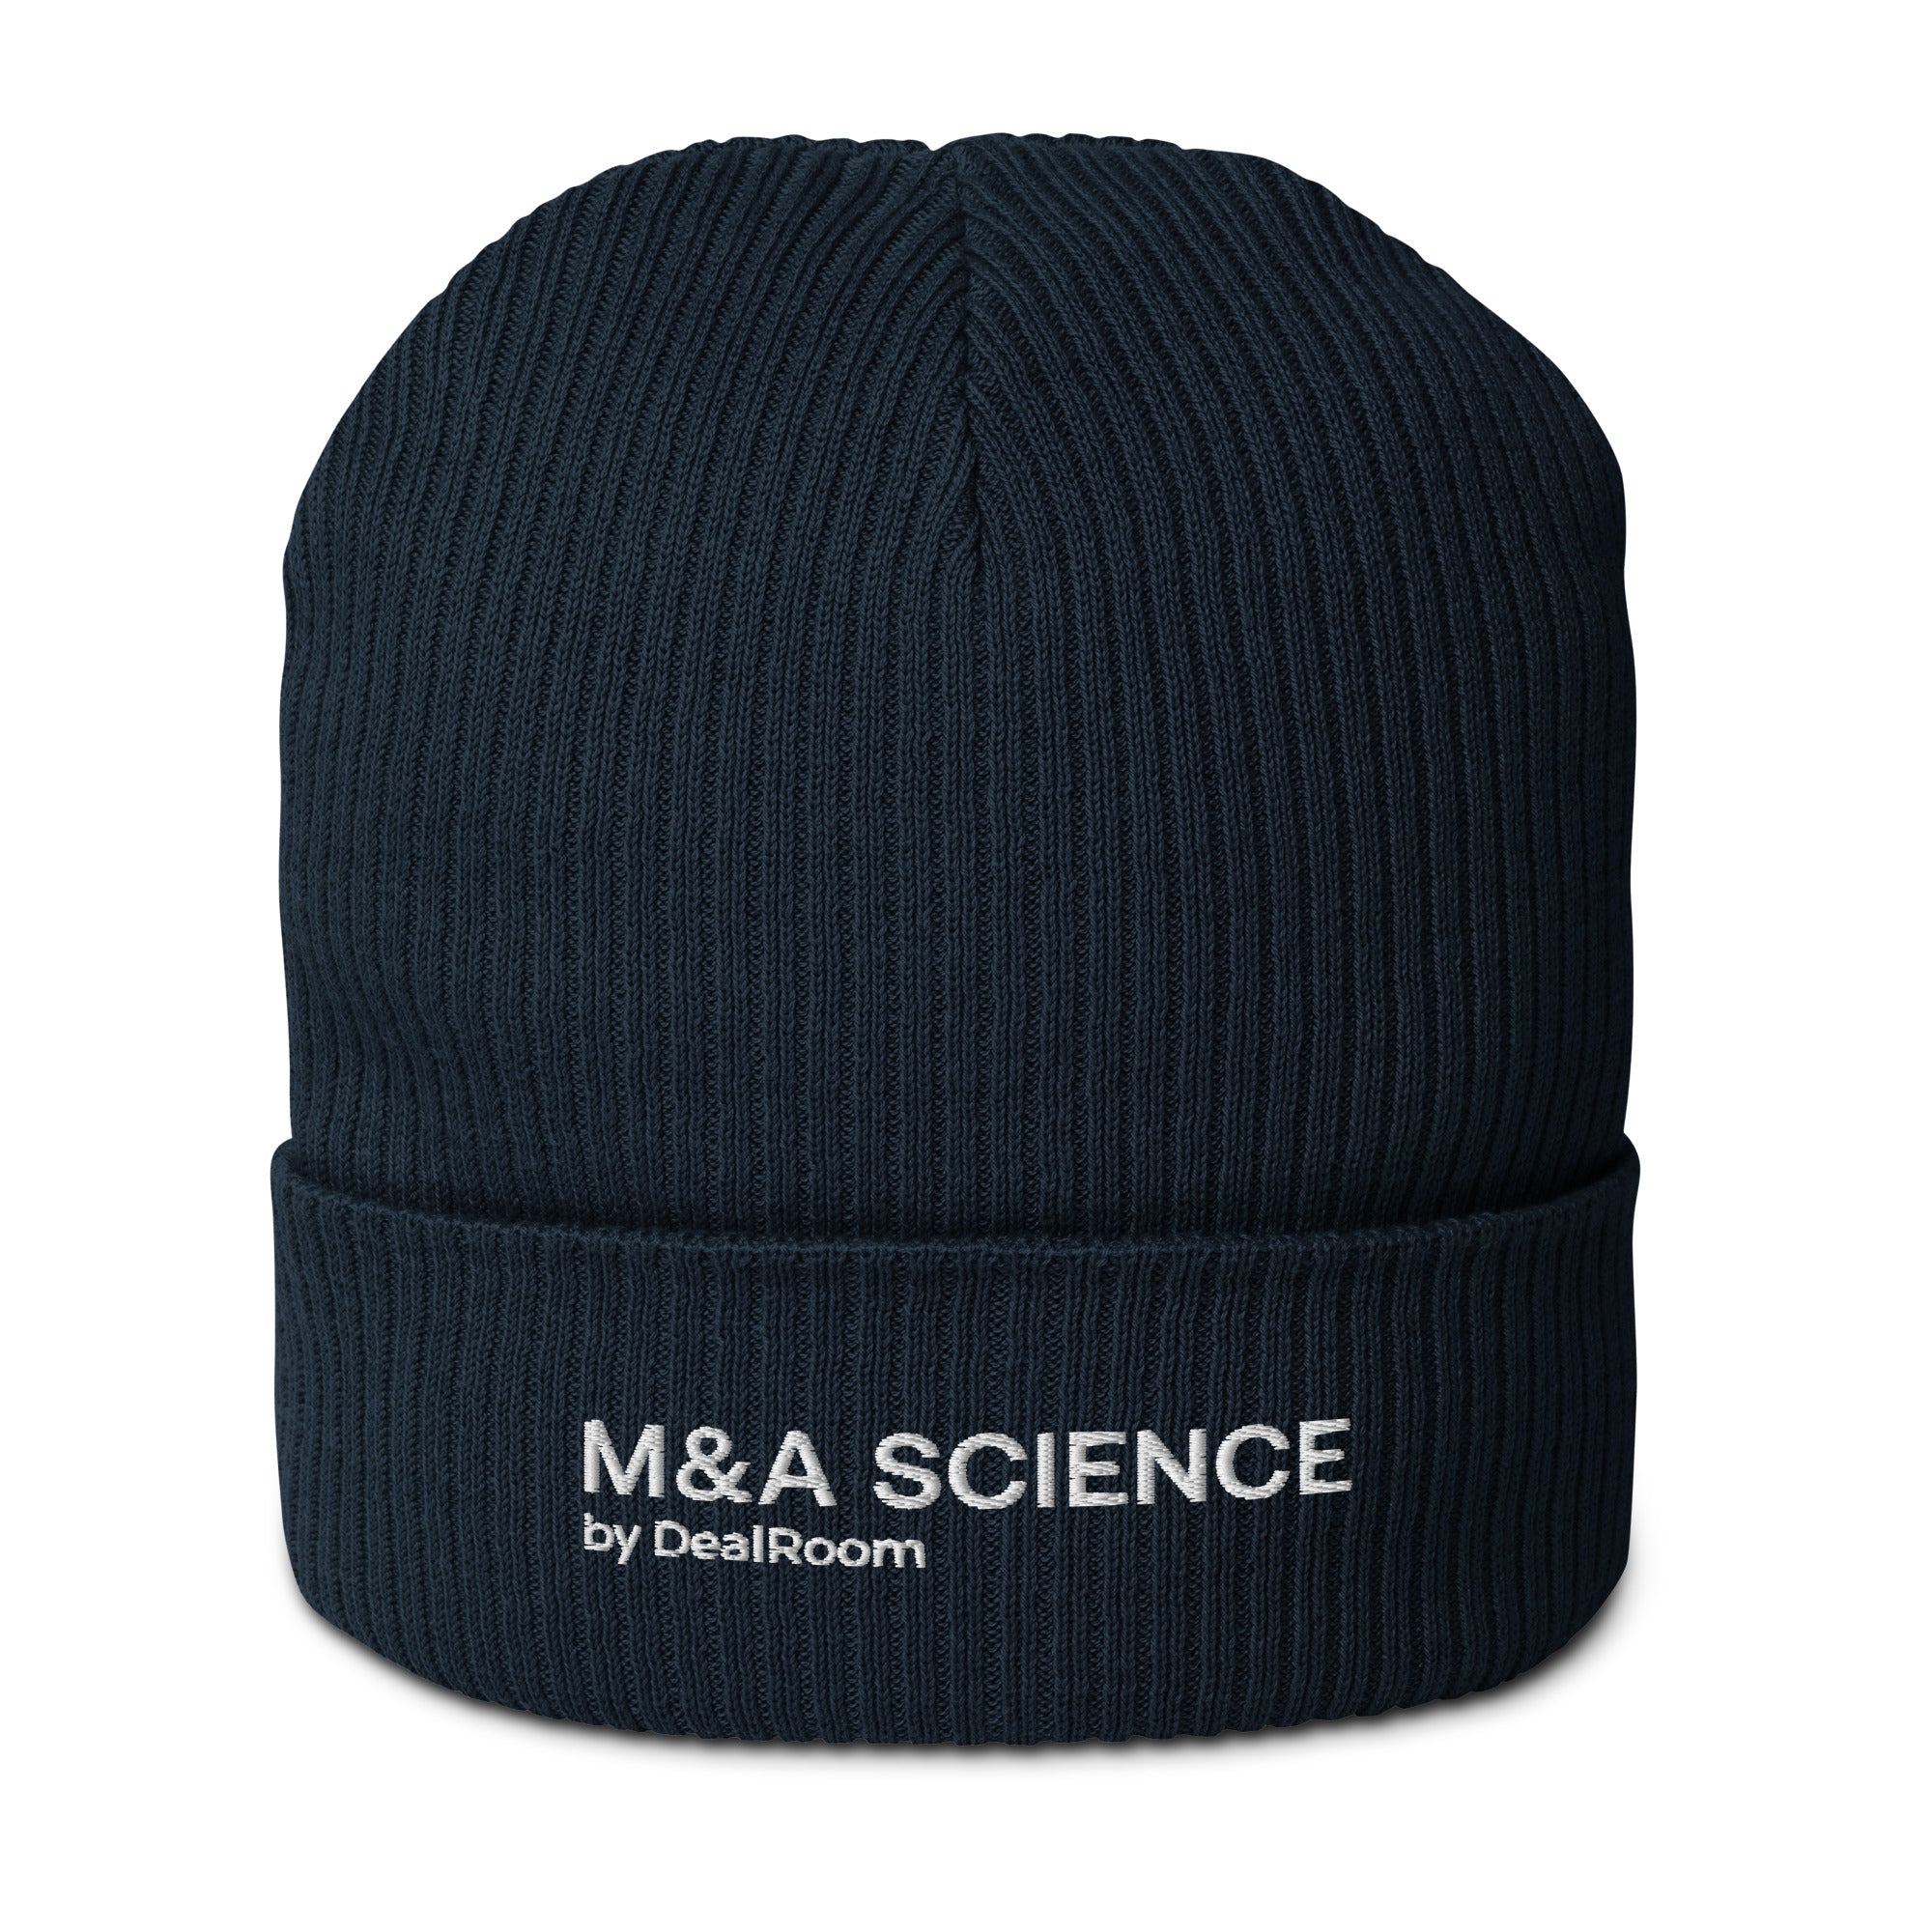 M&A SCIENCE ORGANIC RIBBED BEANIE